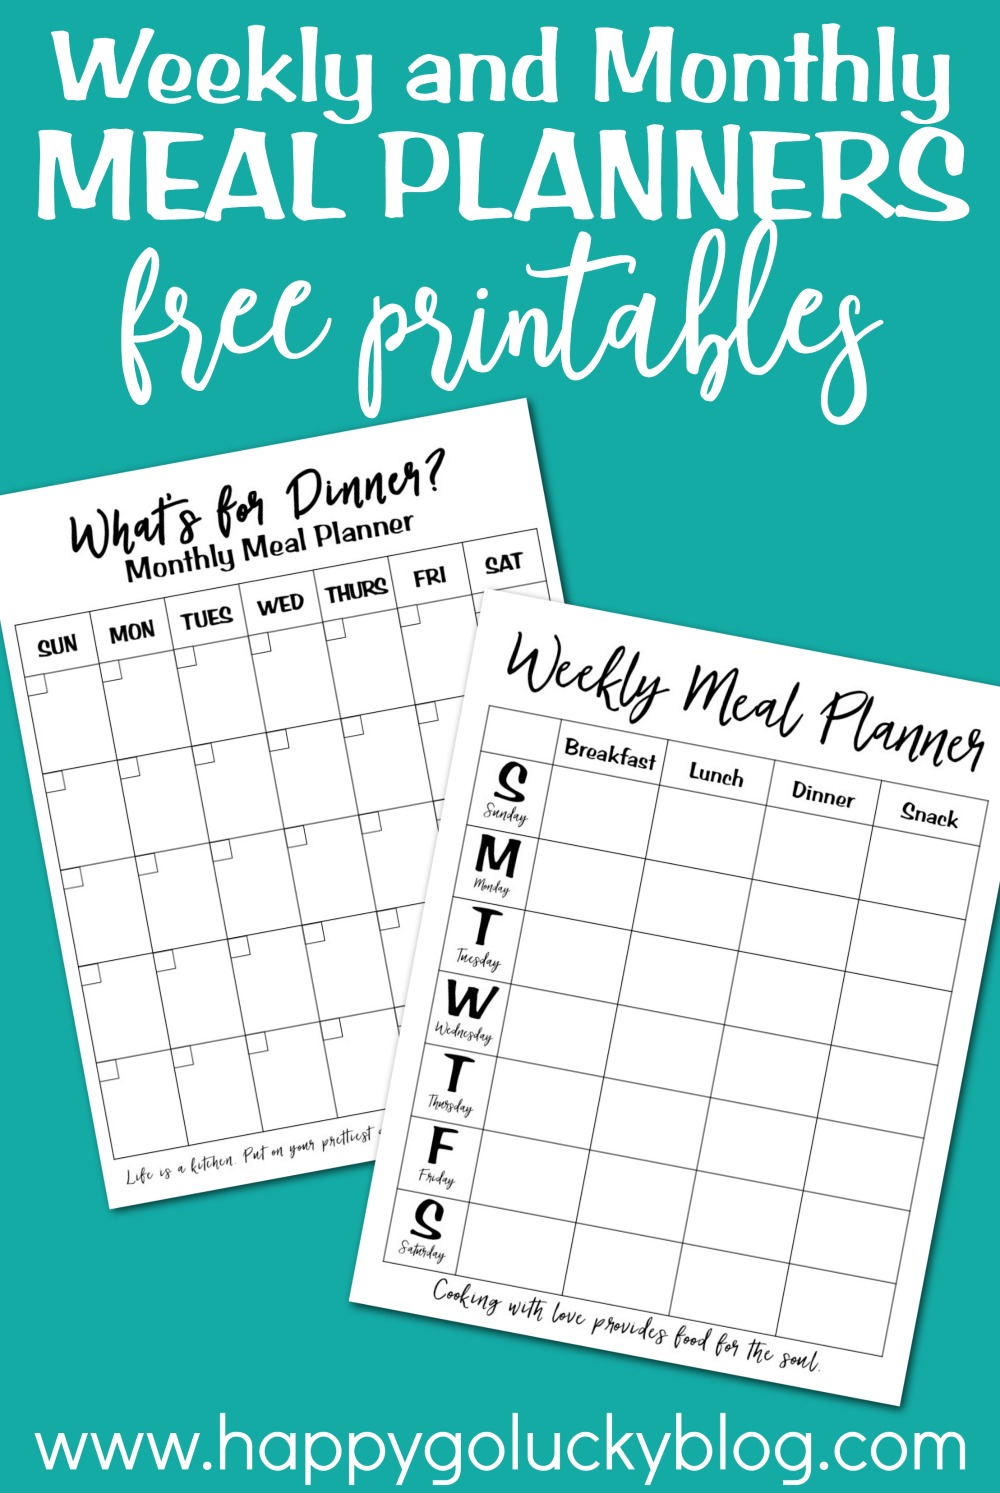 Weekly and Monthly Meal Planners Free Printables